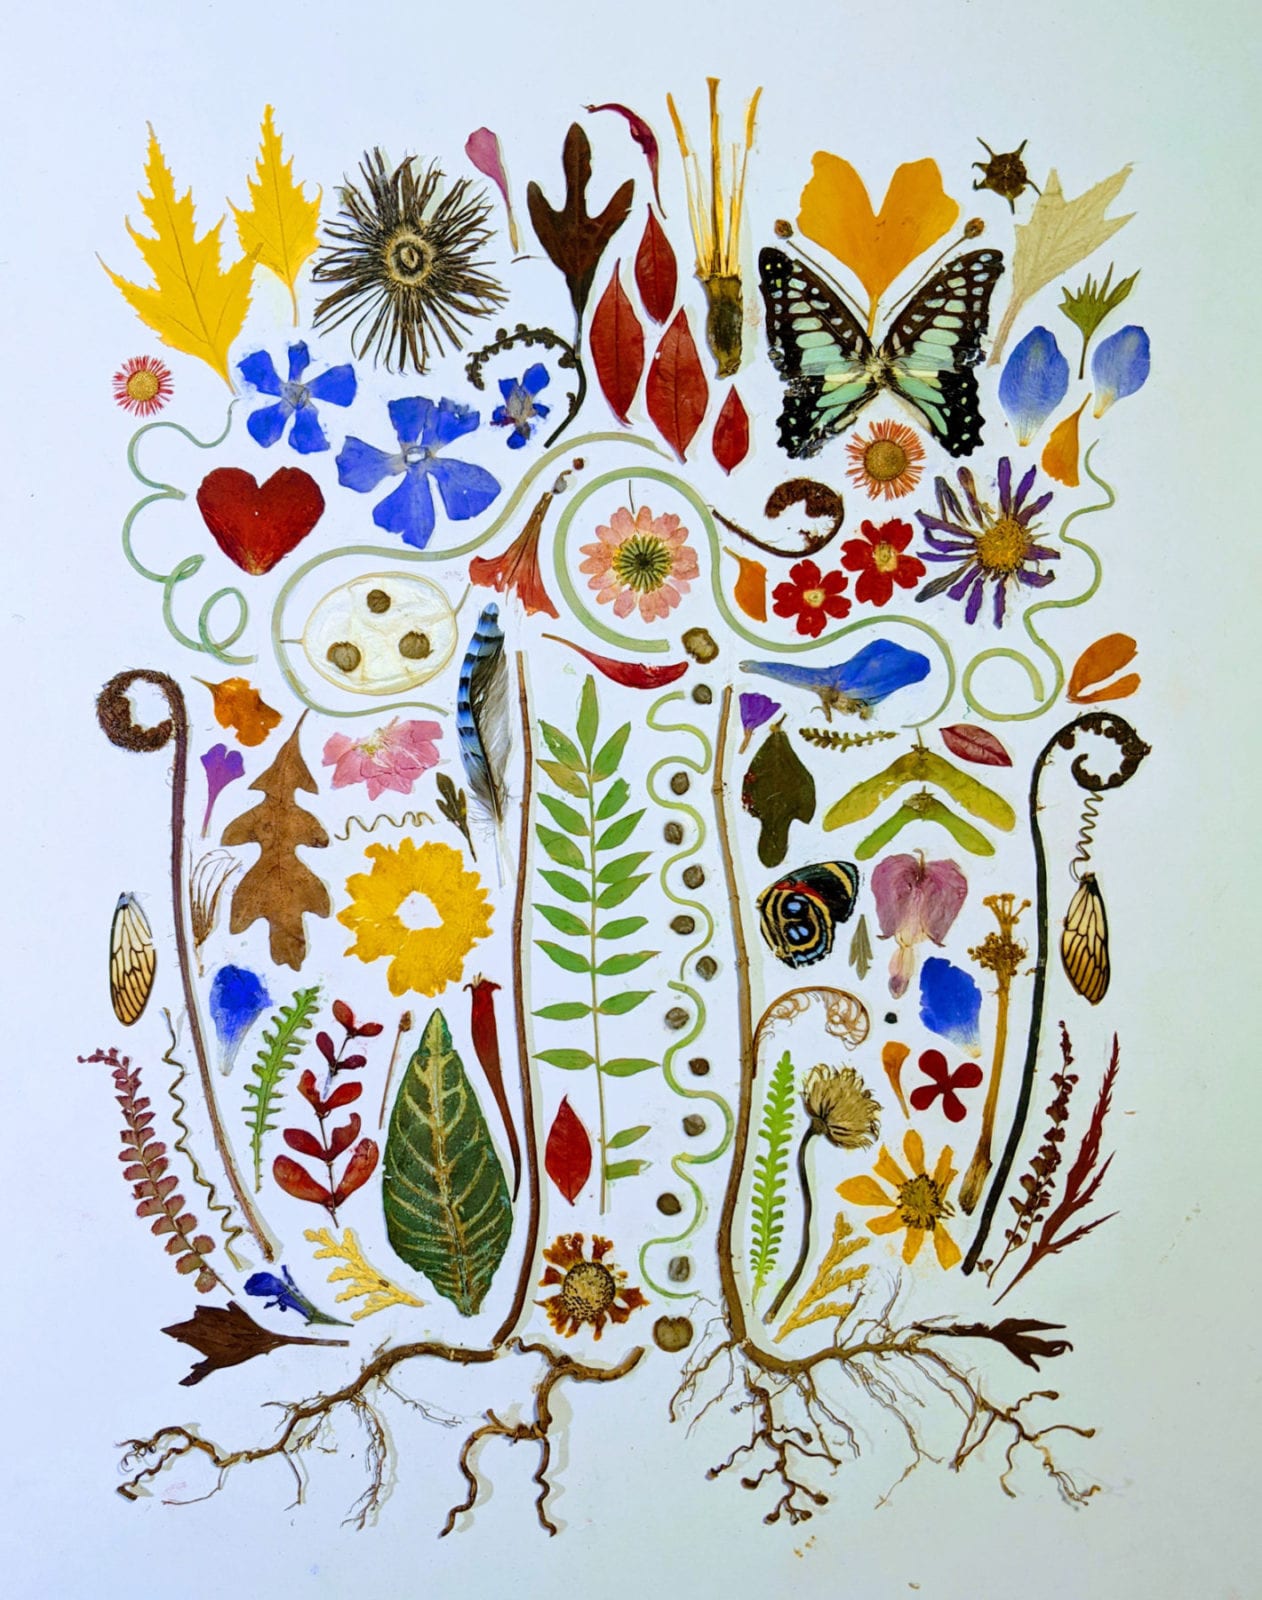 Sally Stang, Garden Party, pressed flora and fauna, 13 x 16 inches